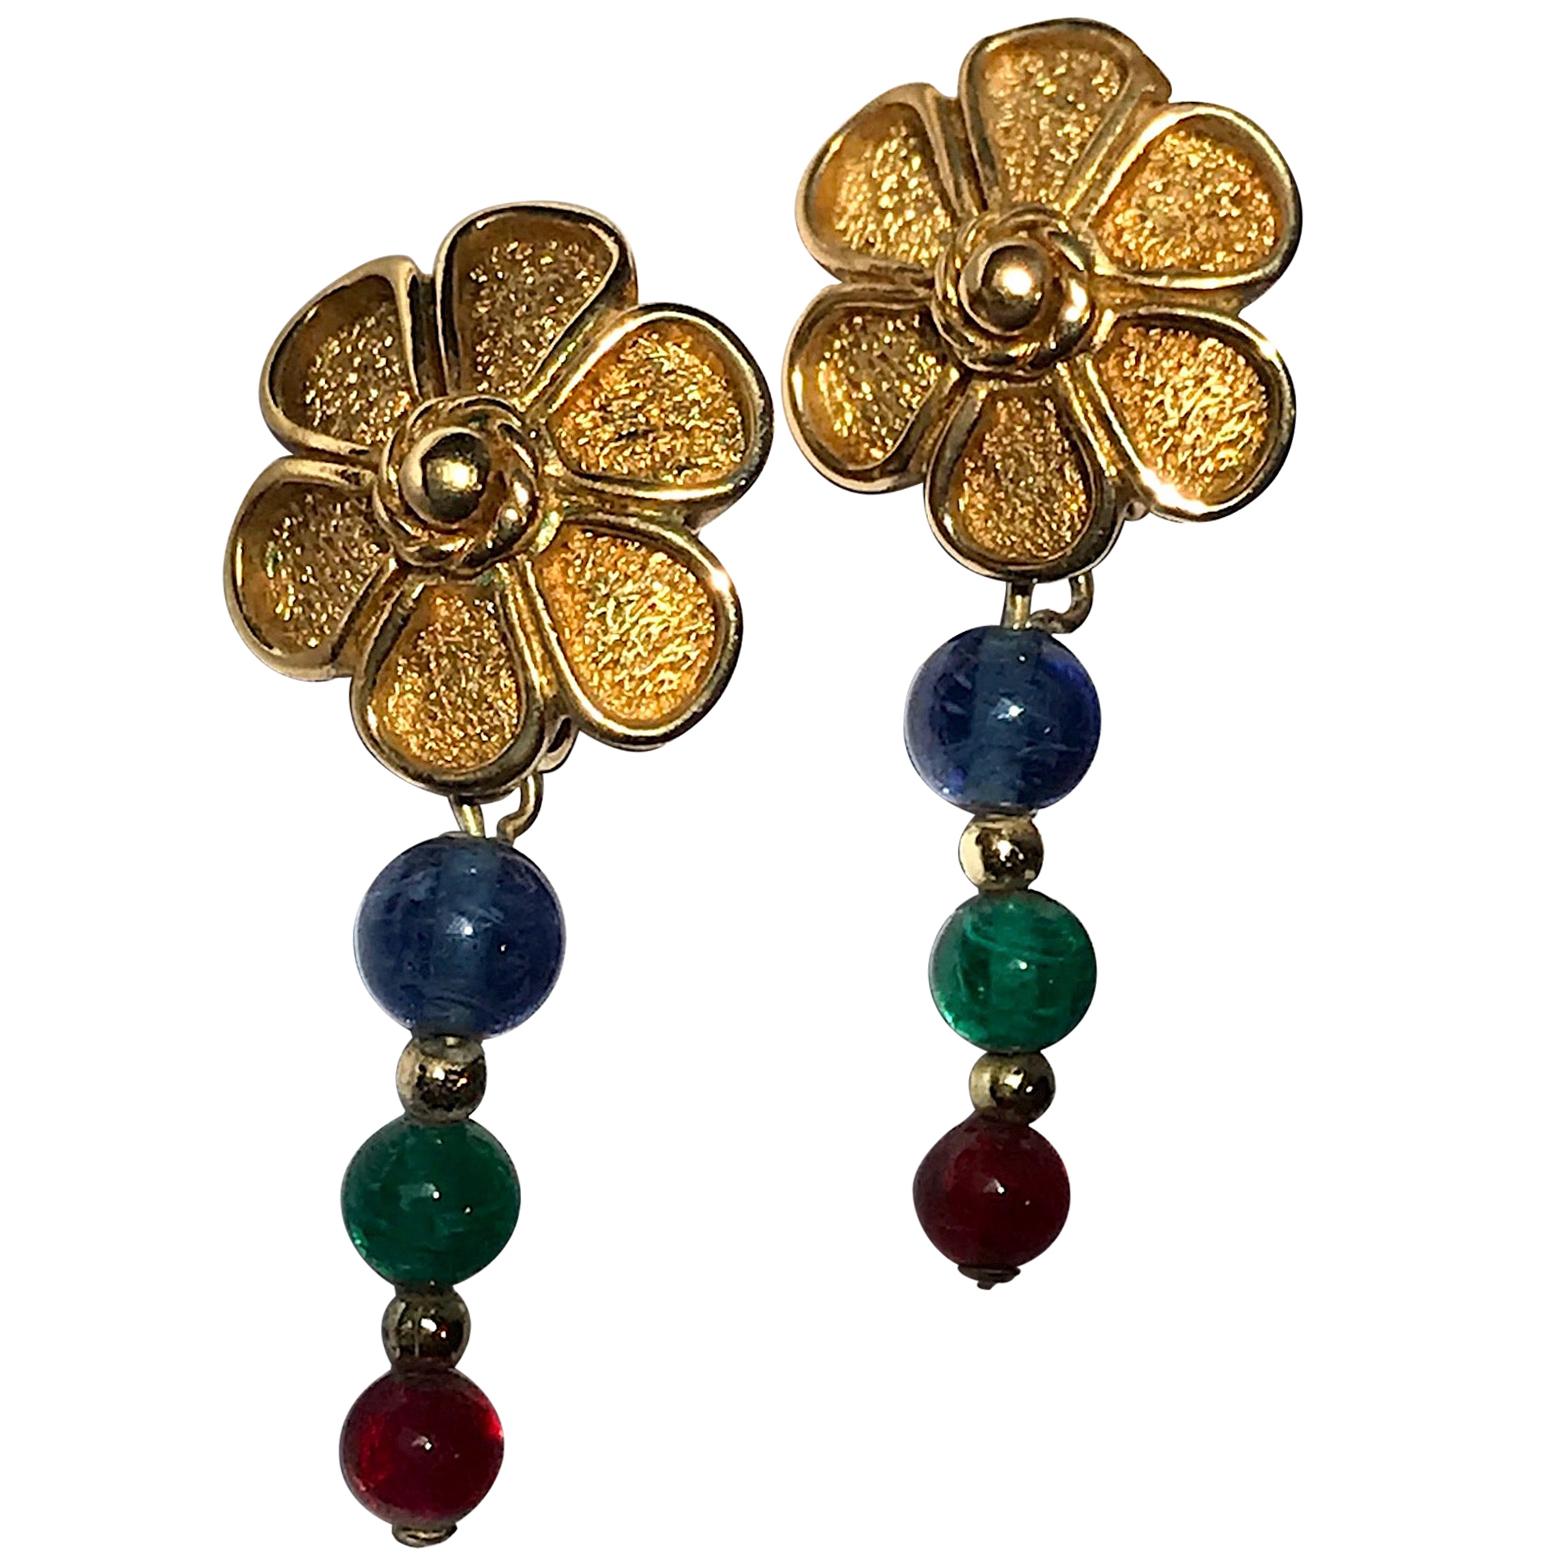 Grosse Germany 1980s Flower Earrings with Red, Blue & Green Beads